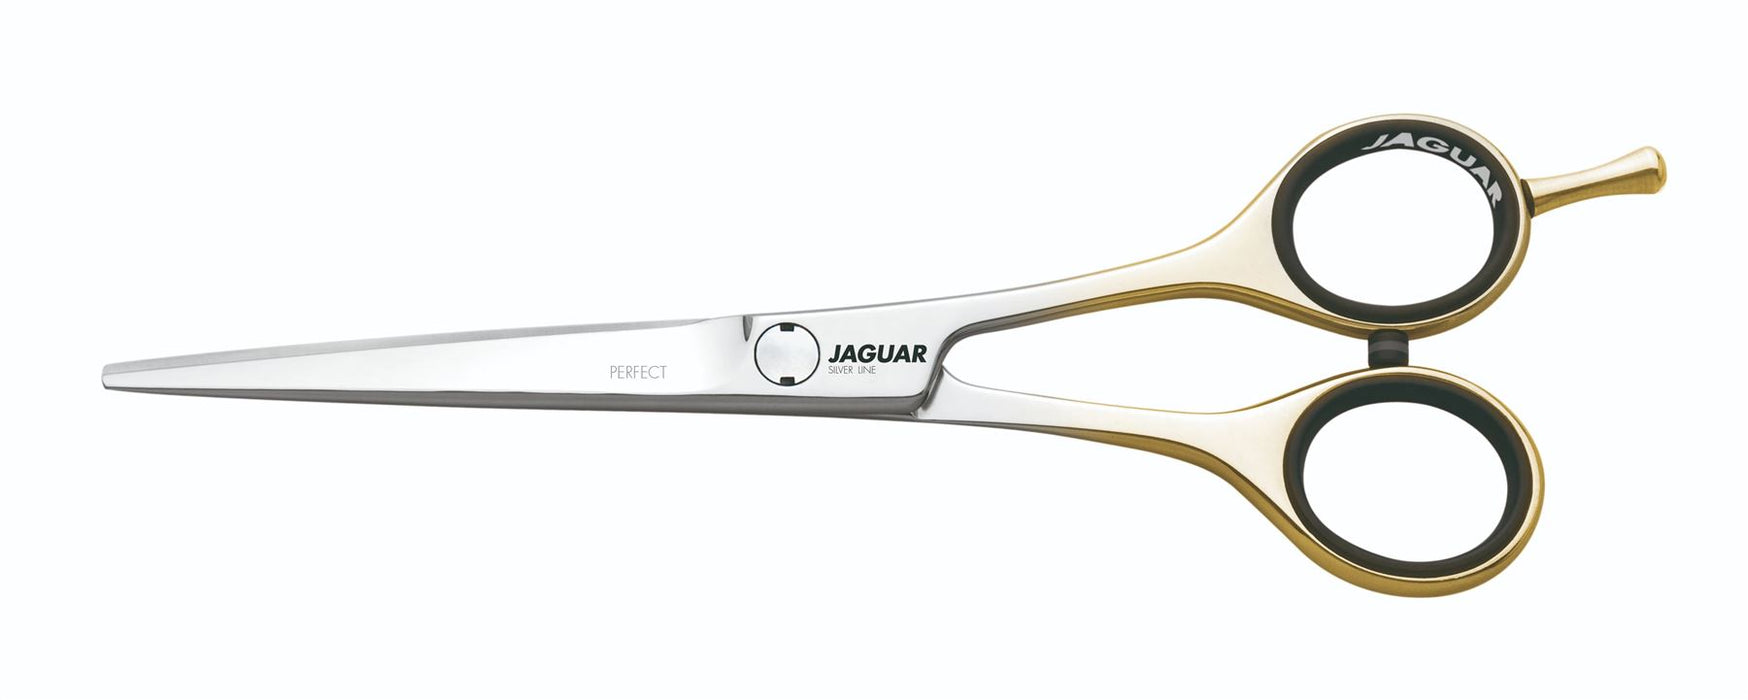 Jaguar Perfect Classic Haircutting Scissors Stainless Steel Polished Finish 6"